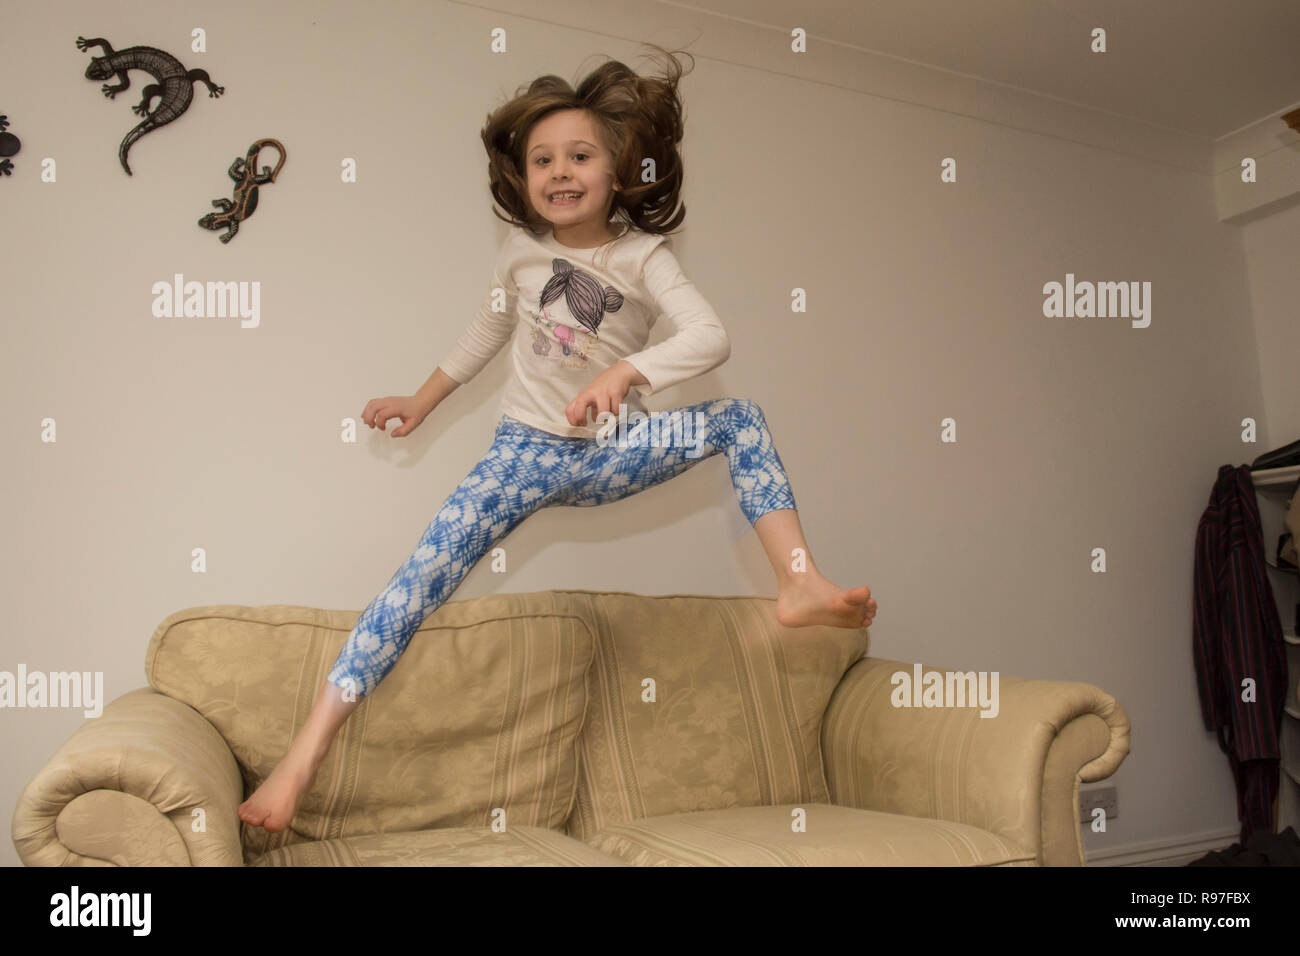 child, girl indoors leaping, jumping on furniture, sofa, being energetic, hyperactive, having fun, six years old, Stock Photo